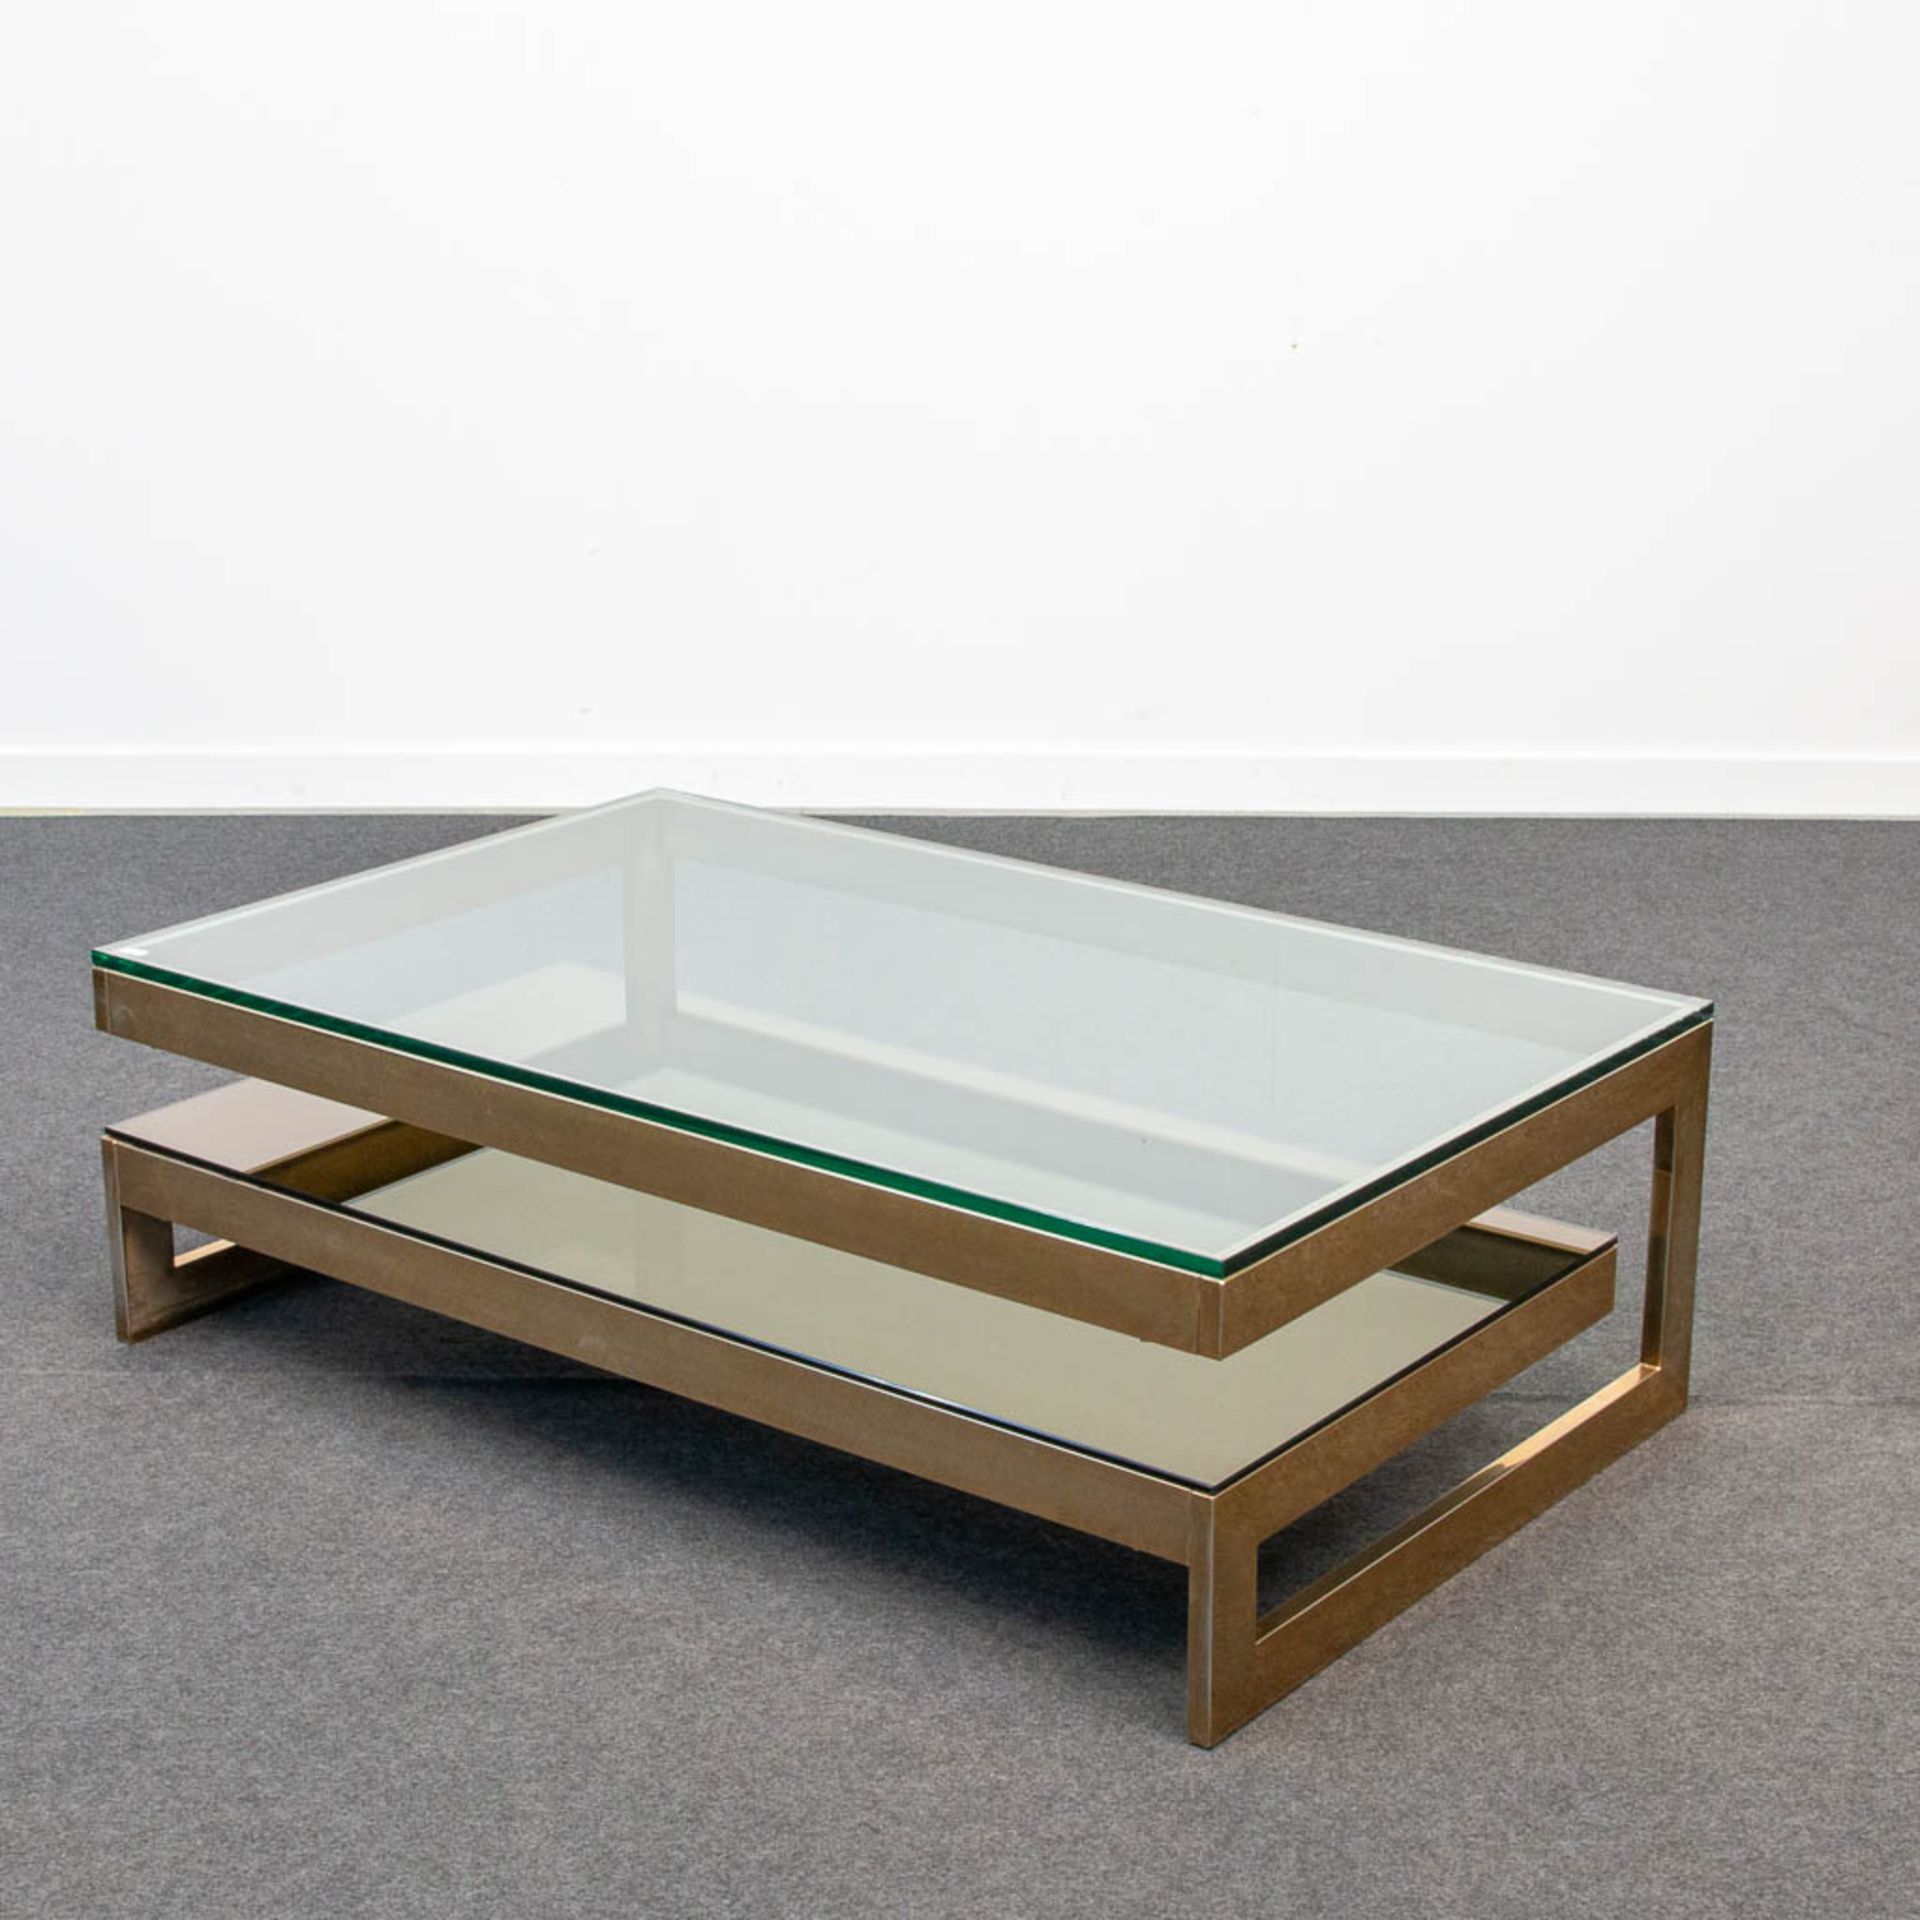 A Belgo-Chrom G-Shape coffee Table with fumé glass and clear glass. 20th century. - Image 7 of 19